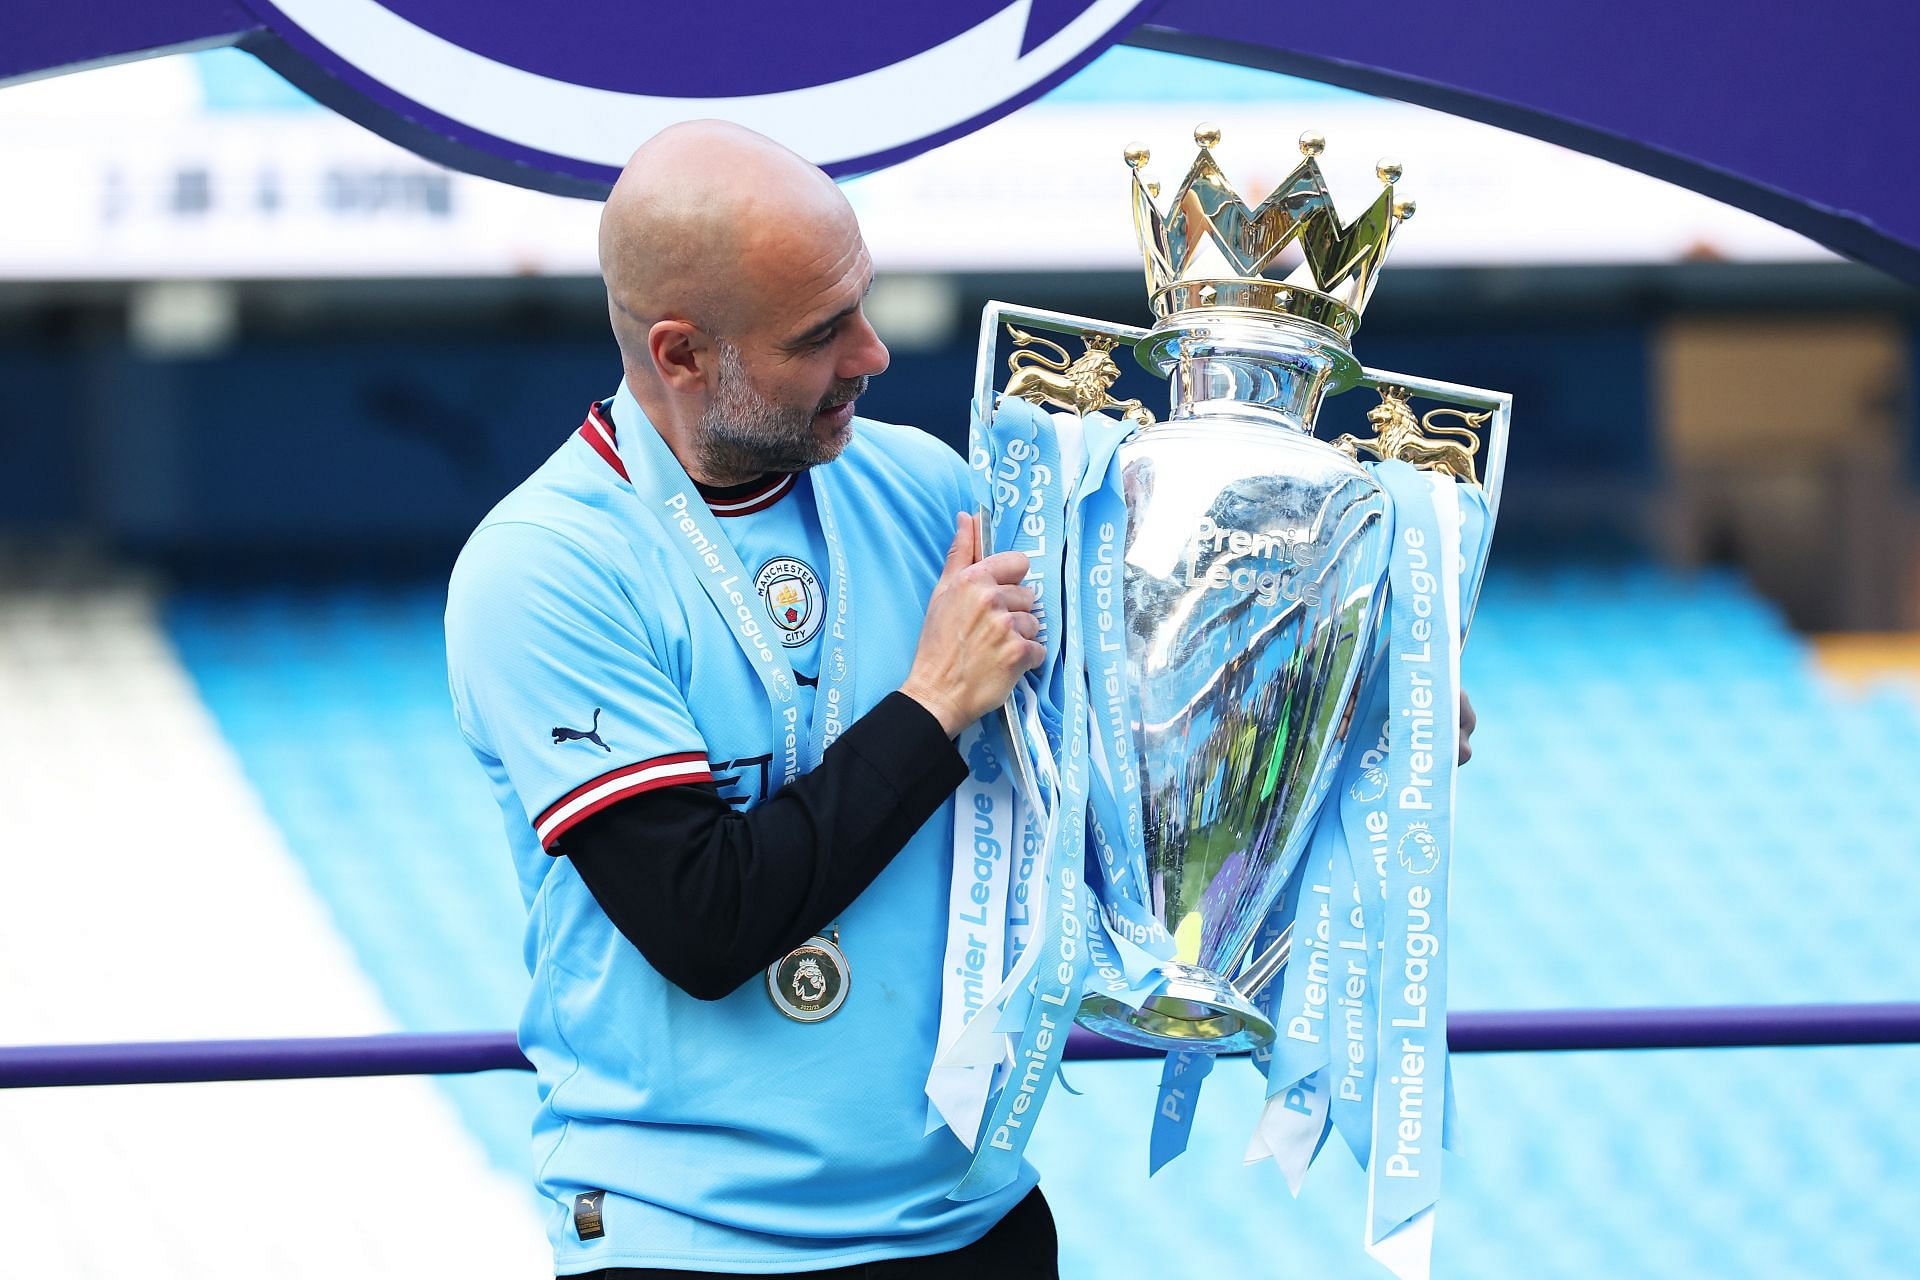 City are expected to face some competition for the title next season.